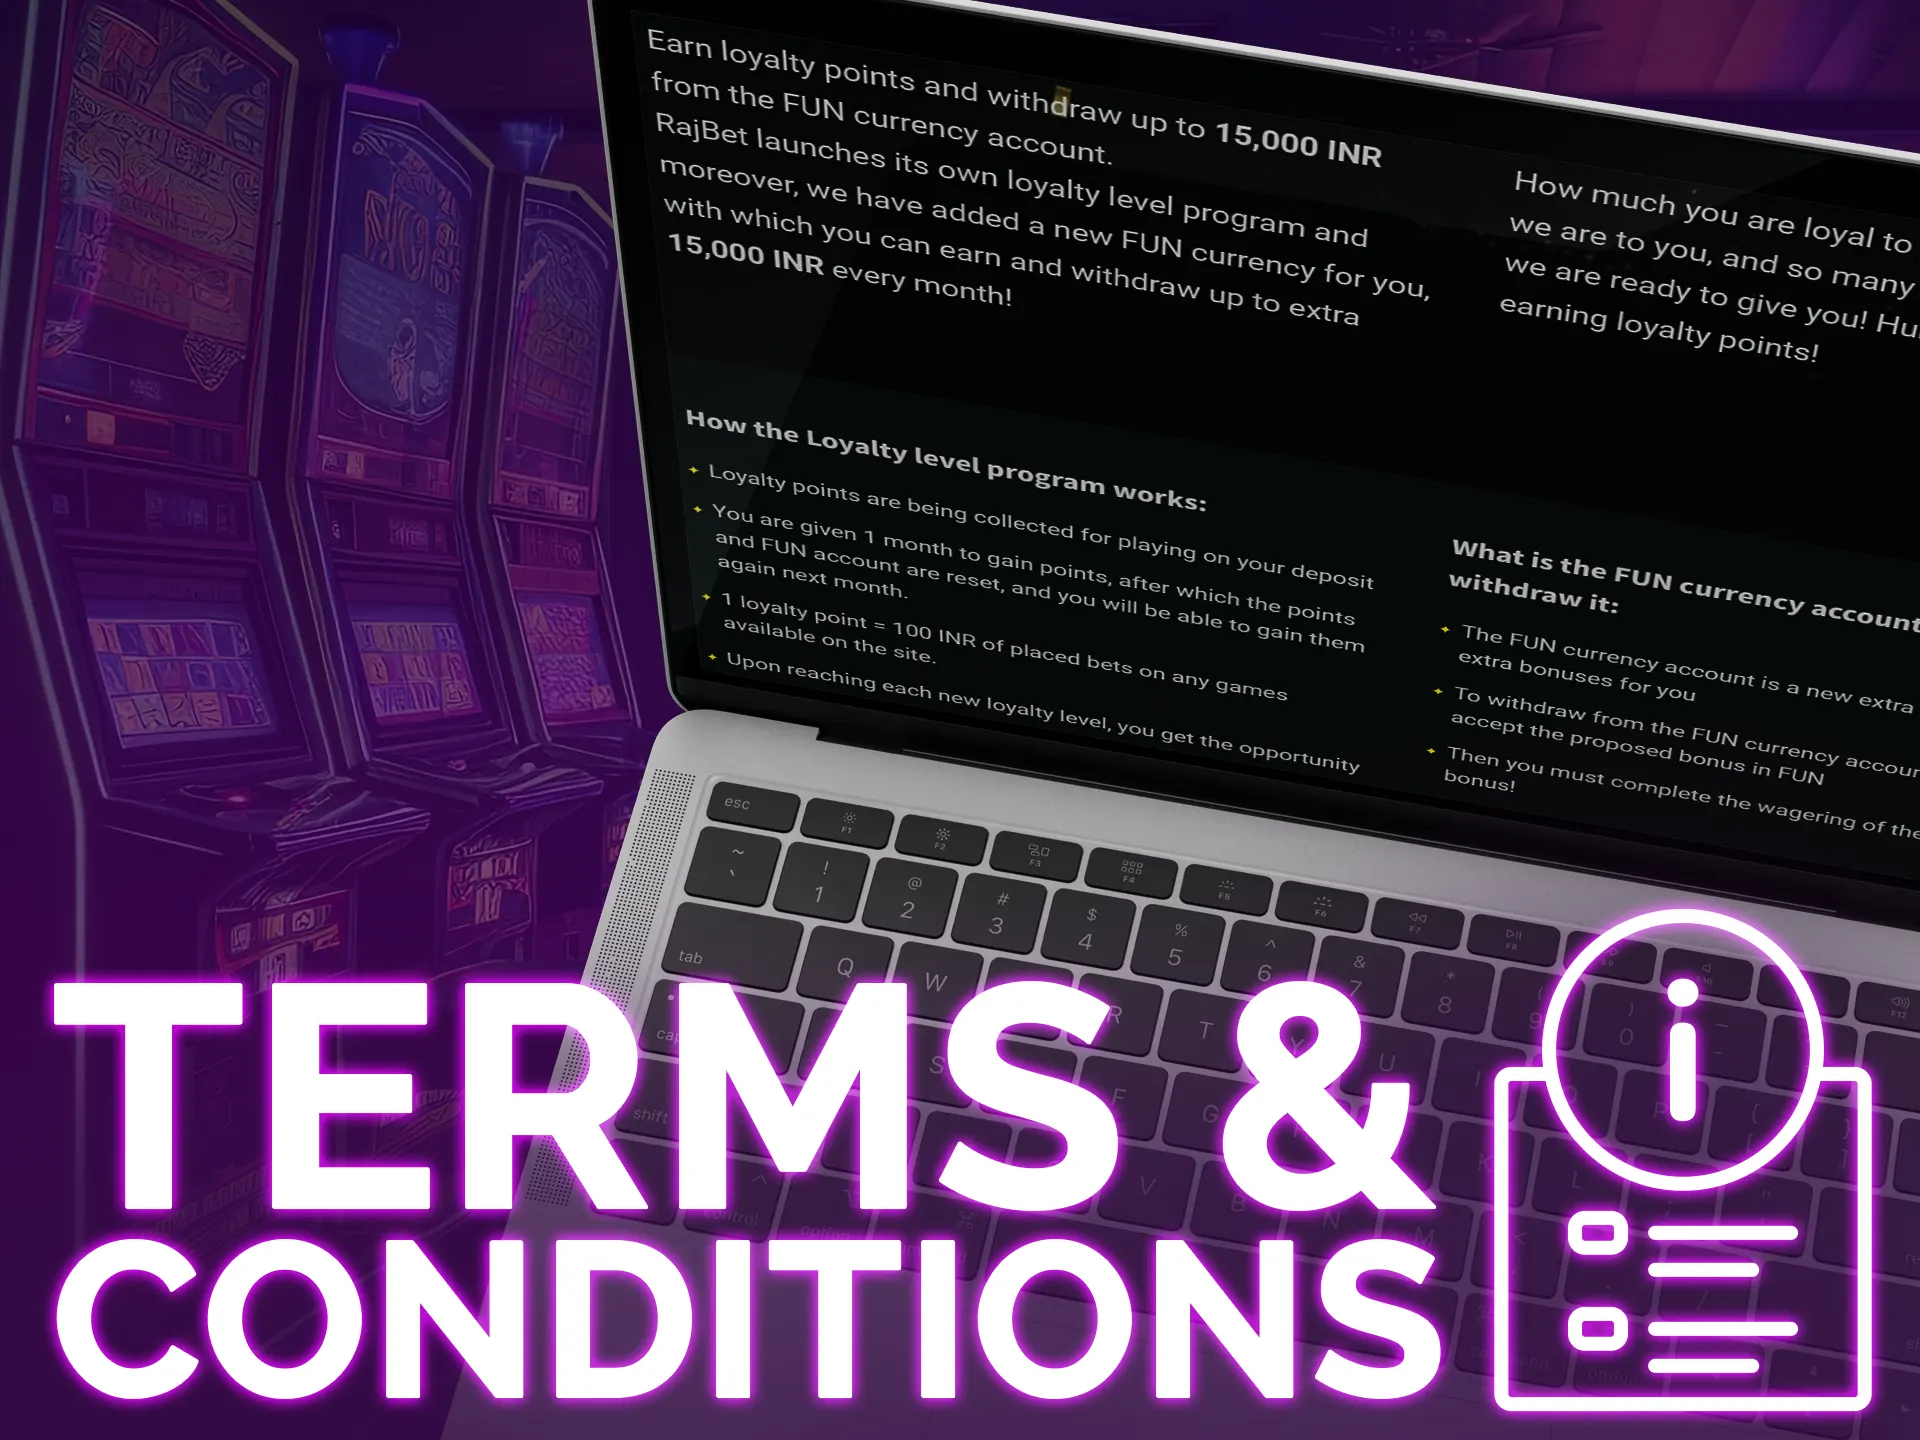 Learn terms and conditions of using loyalty bonuses.